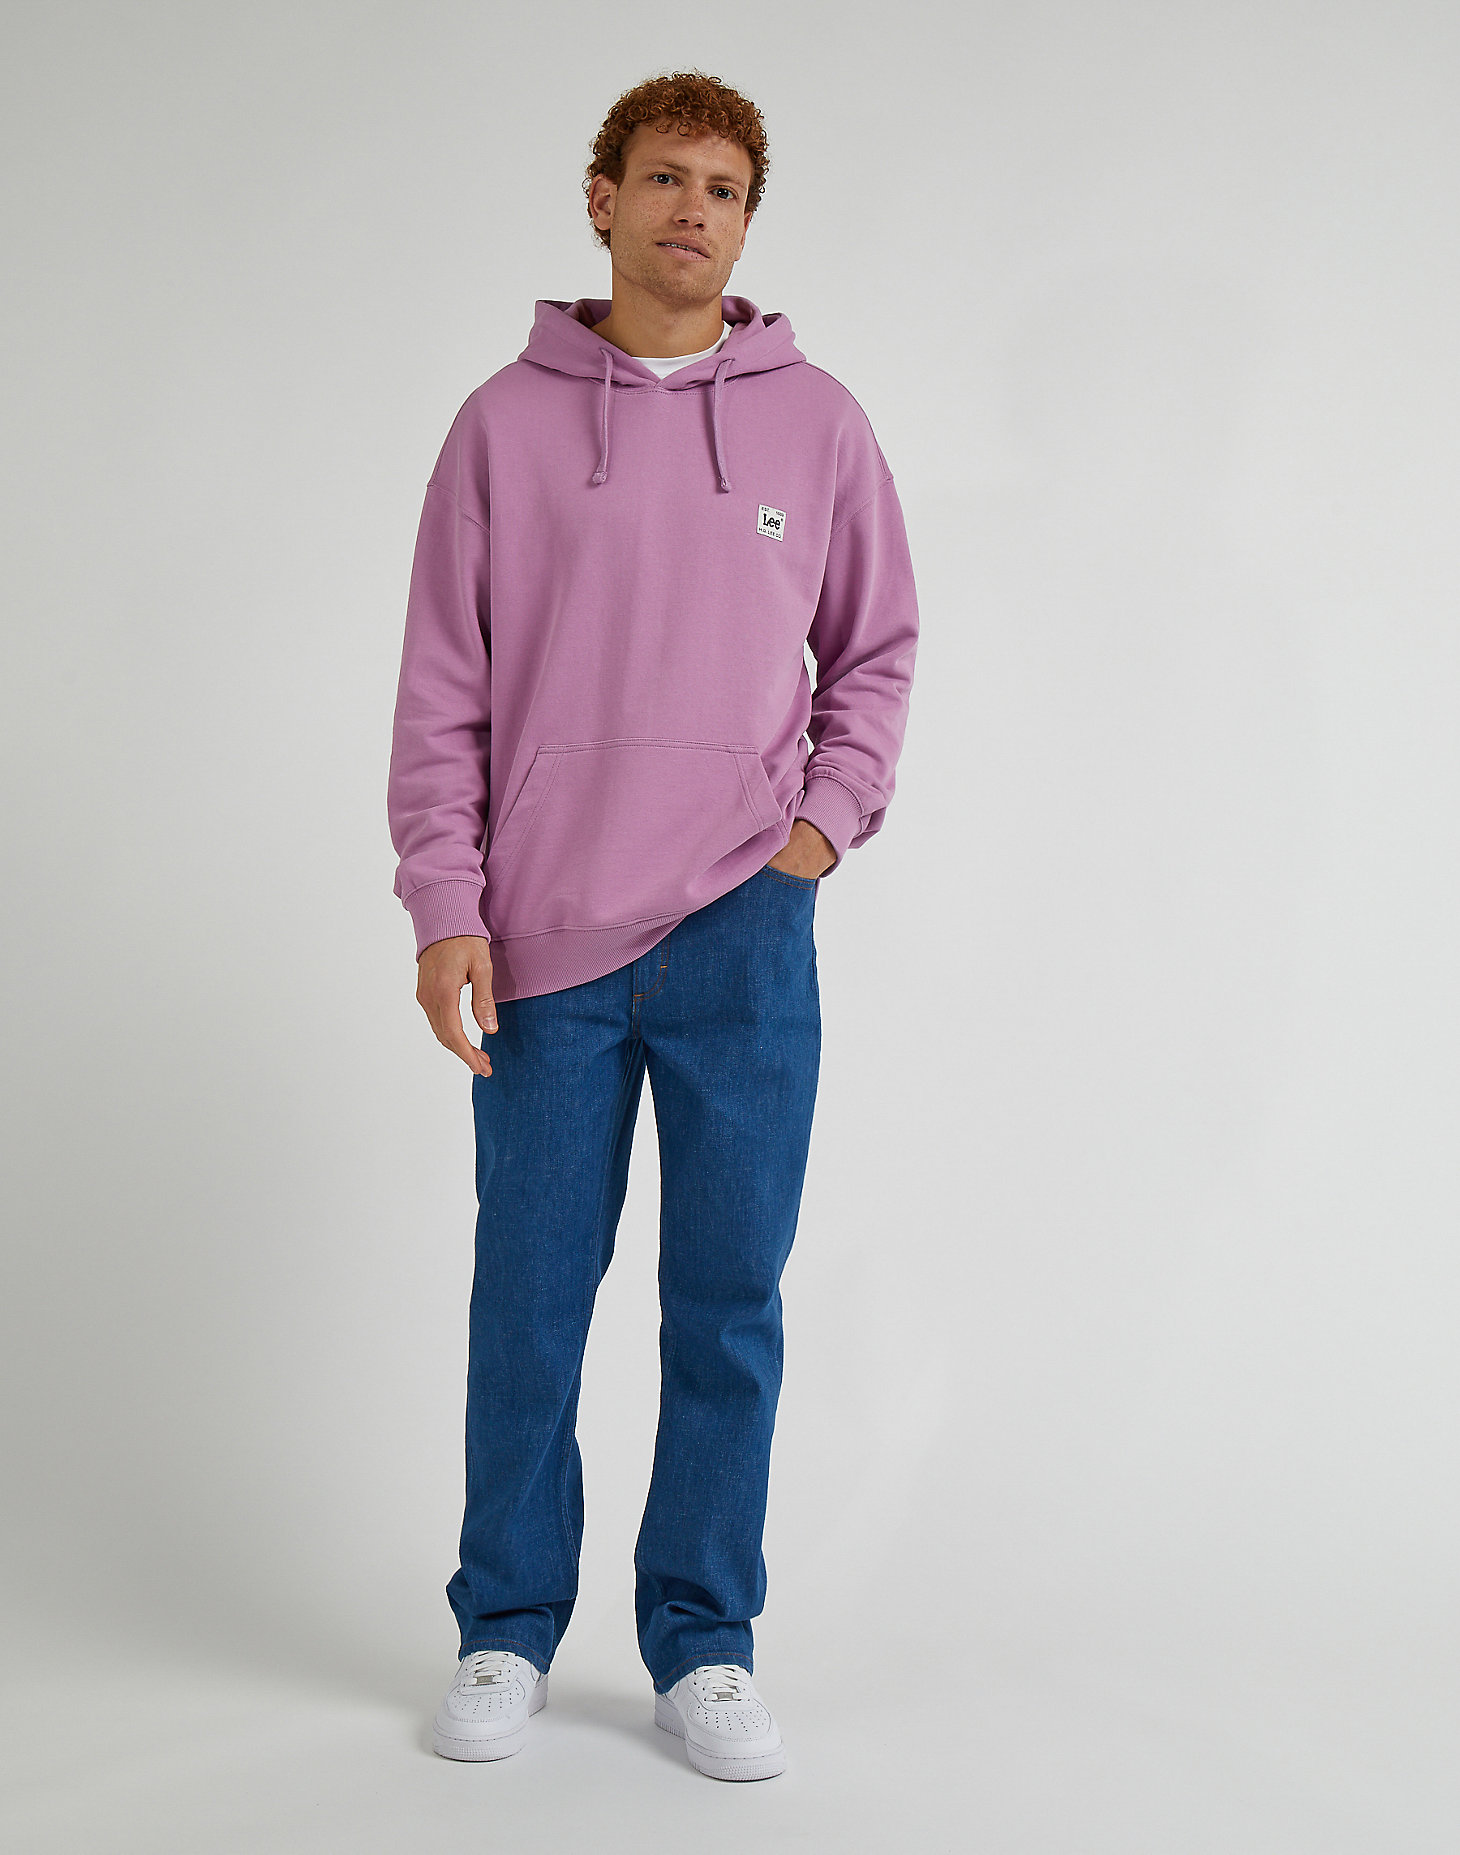 Core Loose Hoodie in Pansy alternative view 2